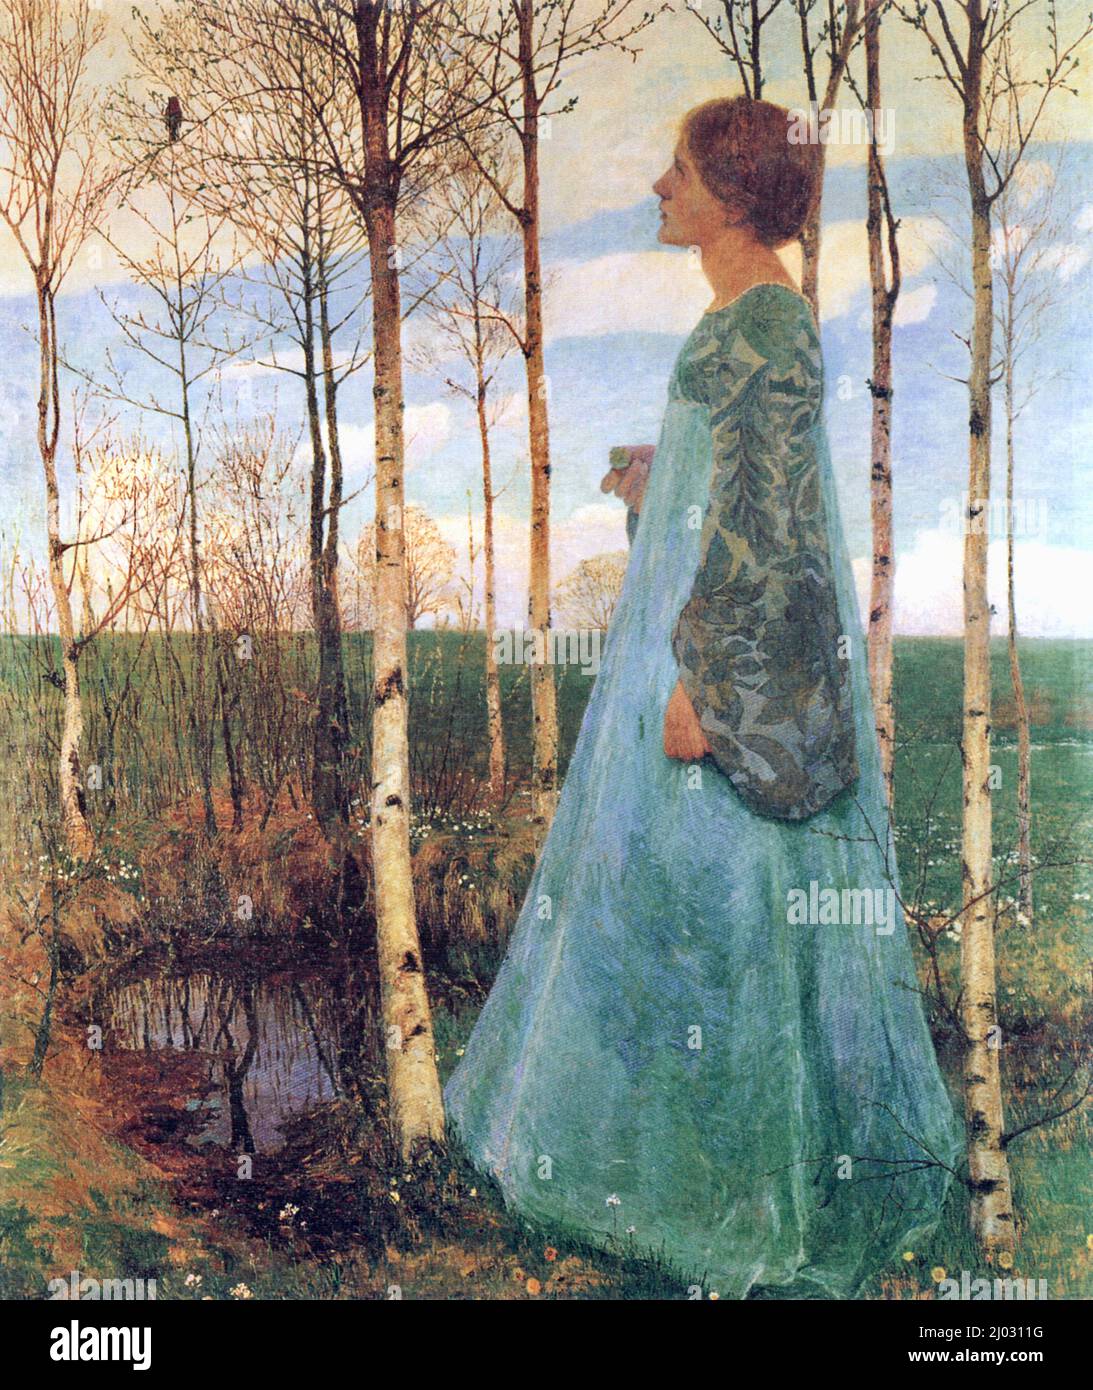 Heinrich Vogeler - Spring - Woman stands in birchwood looking and listening to a bird in a birch tree - 1897 Stock Photo